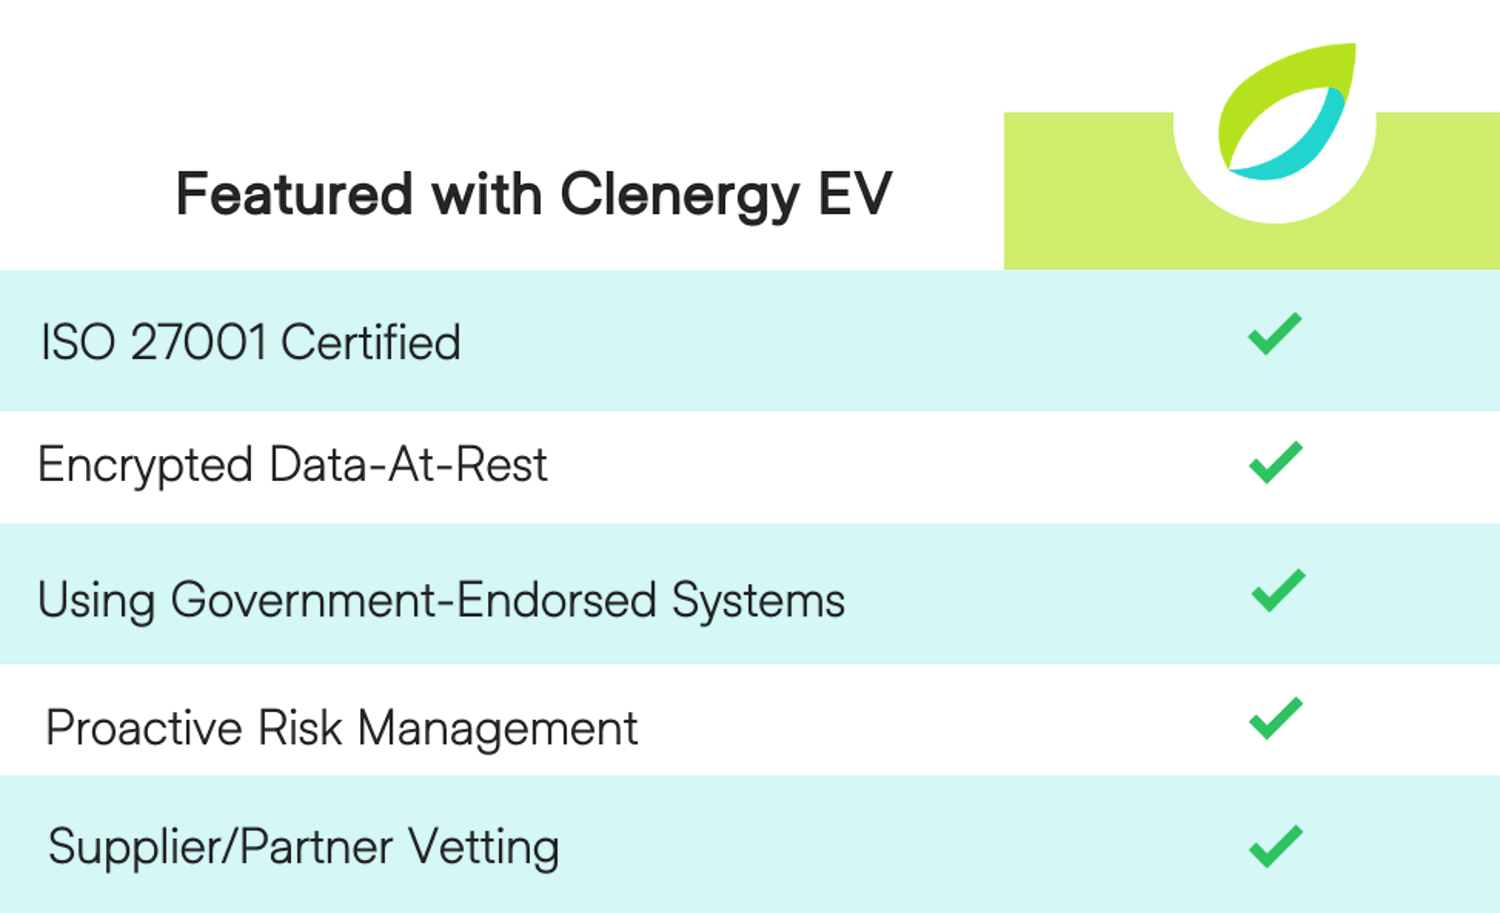 Table of EV charging security features with Clenergy EV